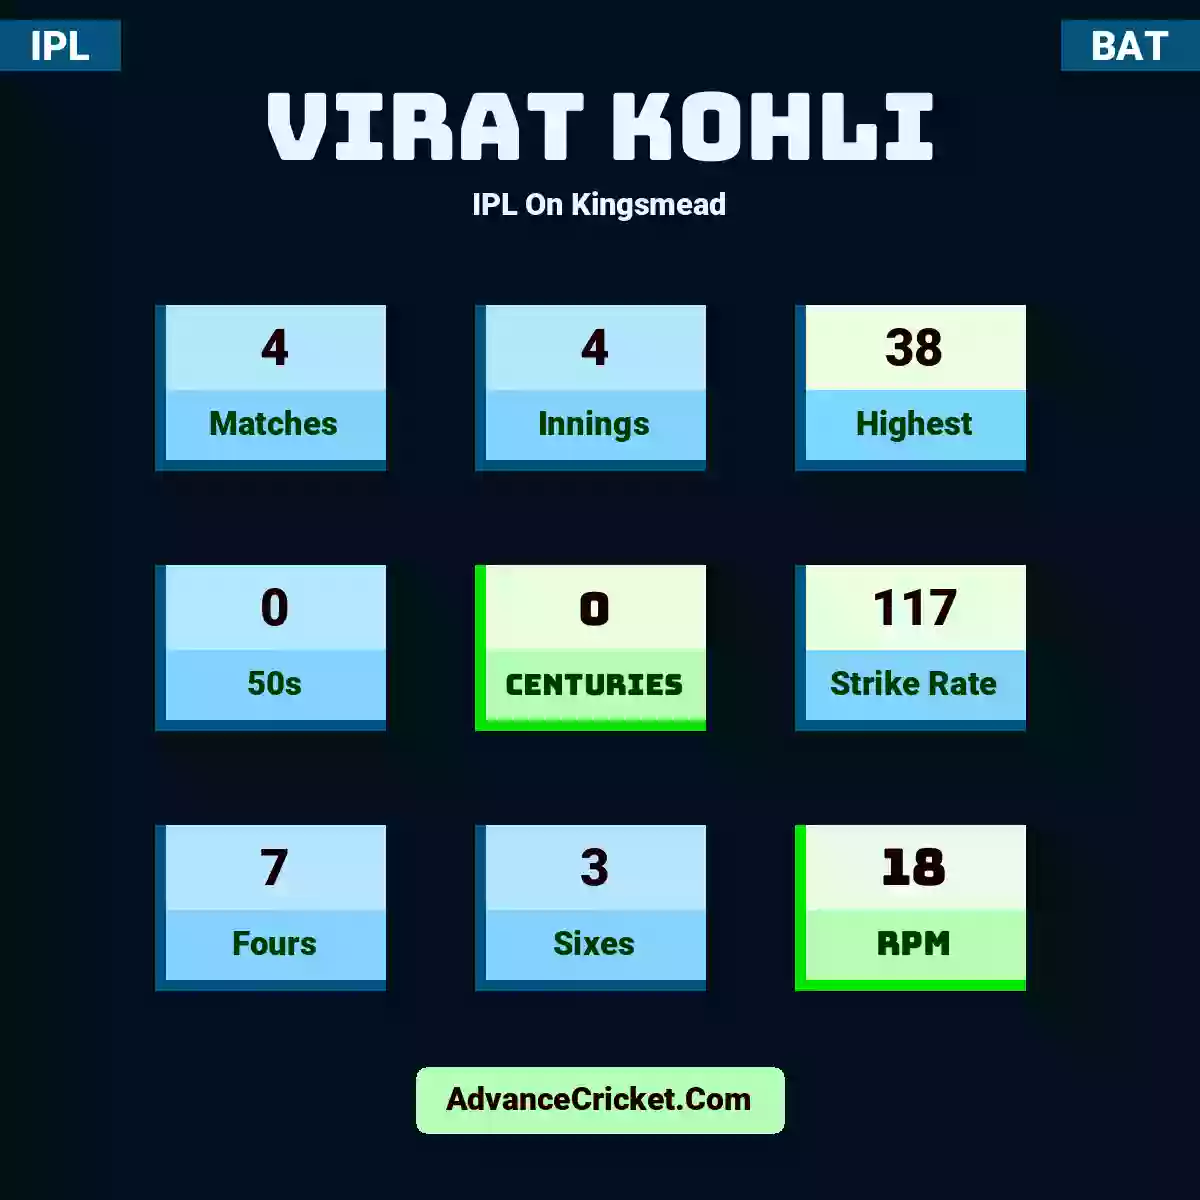 Virat Kohli IPL  On Kingsmead, Virat Kohli played 4 matches, scored 38 runs as highest, 0 half-centuries, and 0 centuries, with a strike rate of 117. V.Kohli hit 7 fours and 3 sixes, with an RPM of 18.